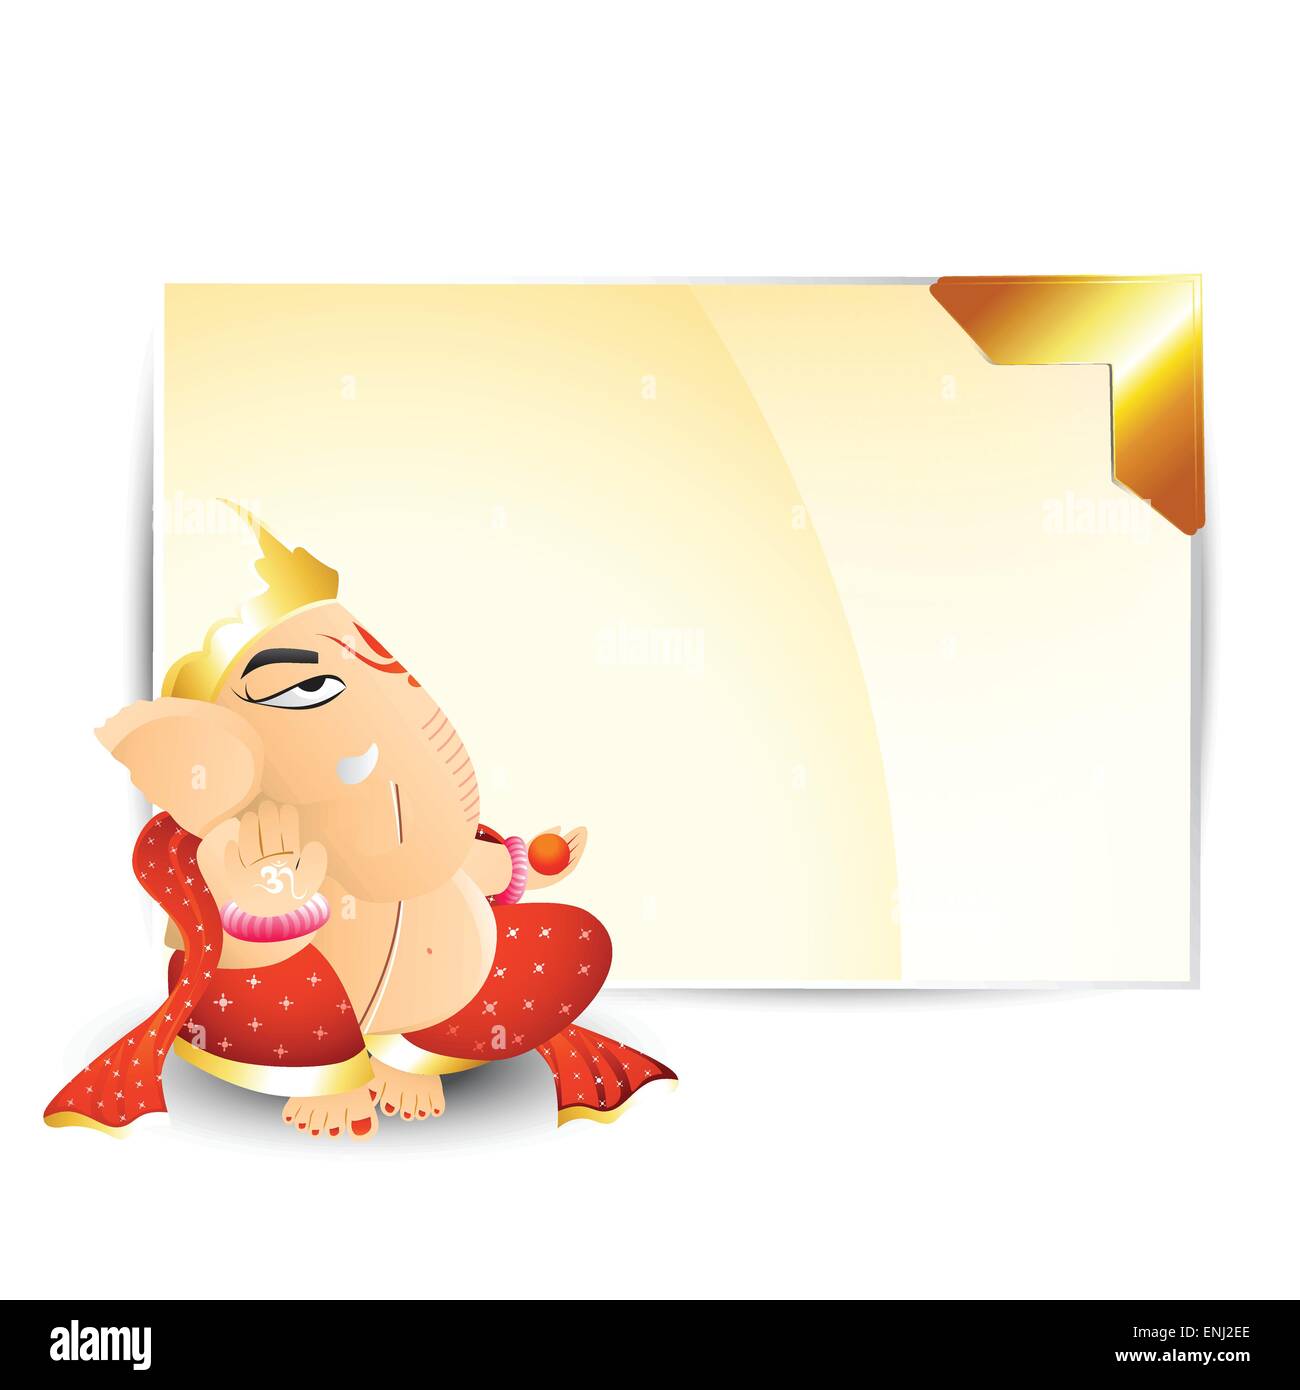 Ganesh ji Cut Out Stock Images & Pictures - Alamy